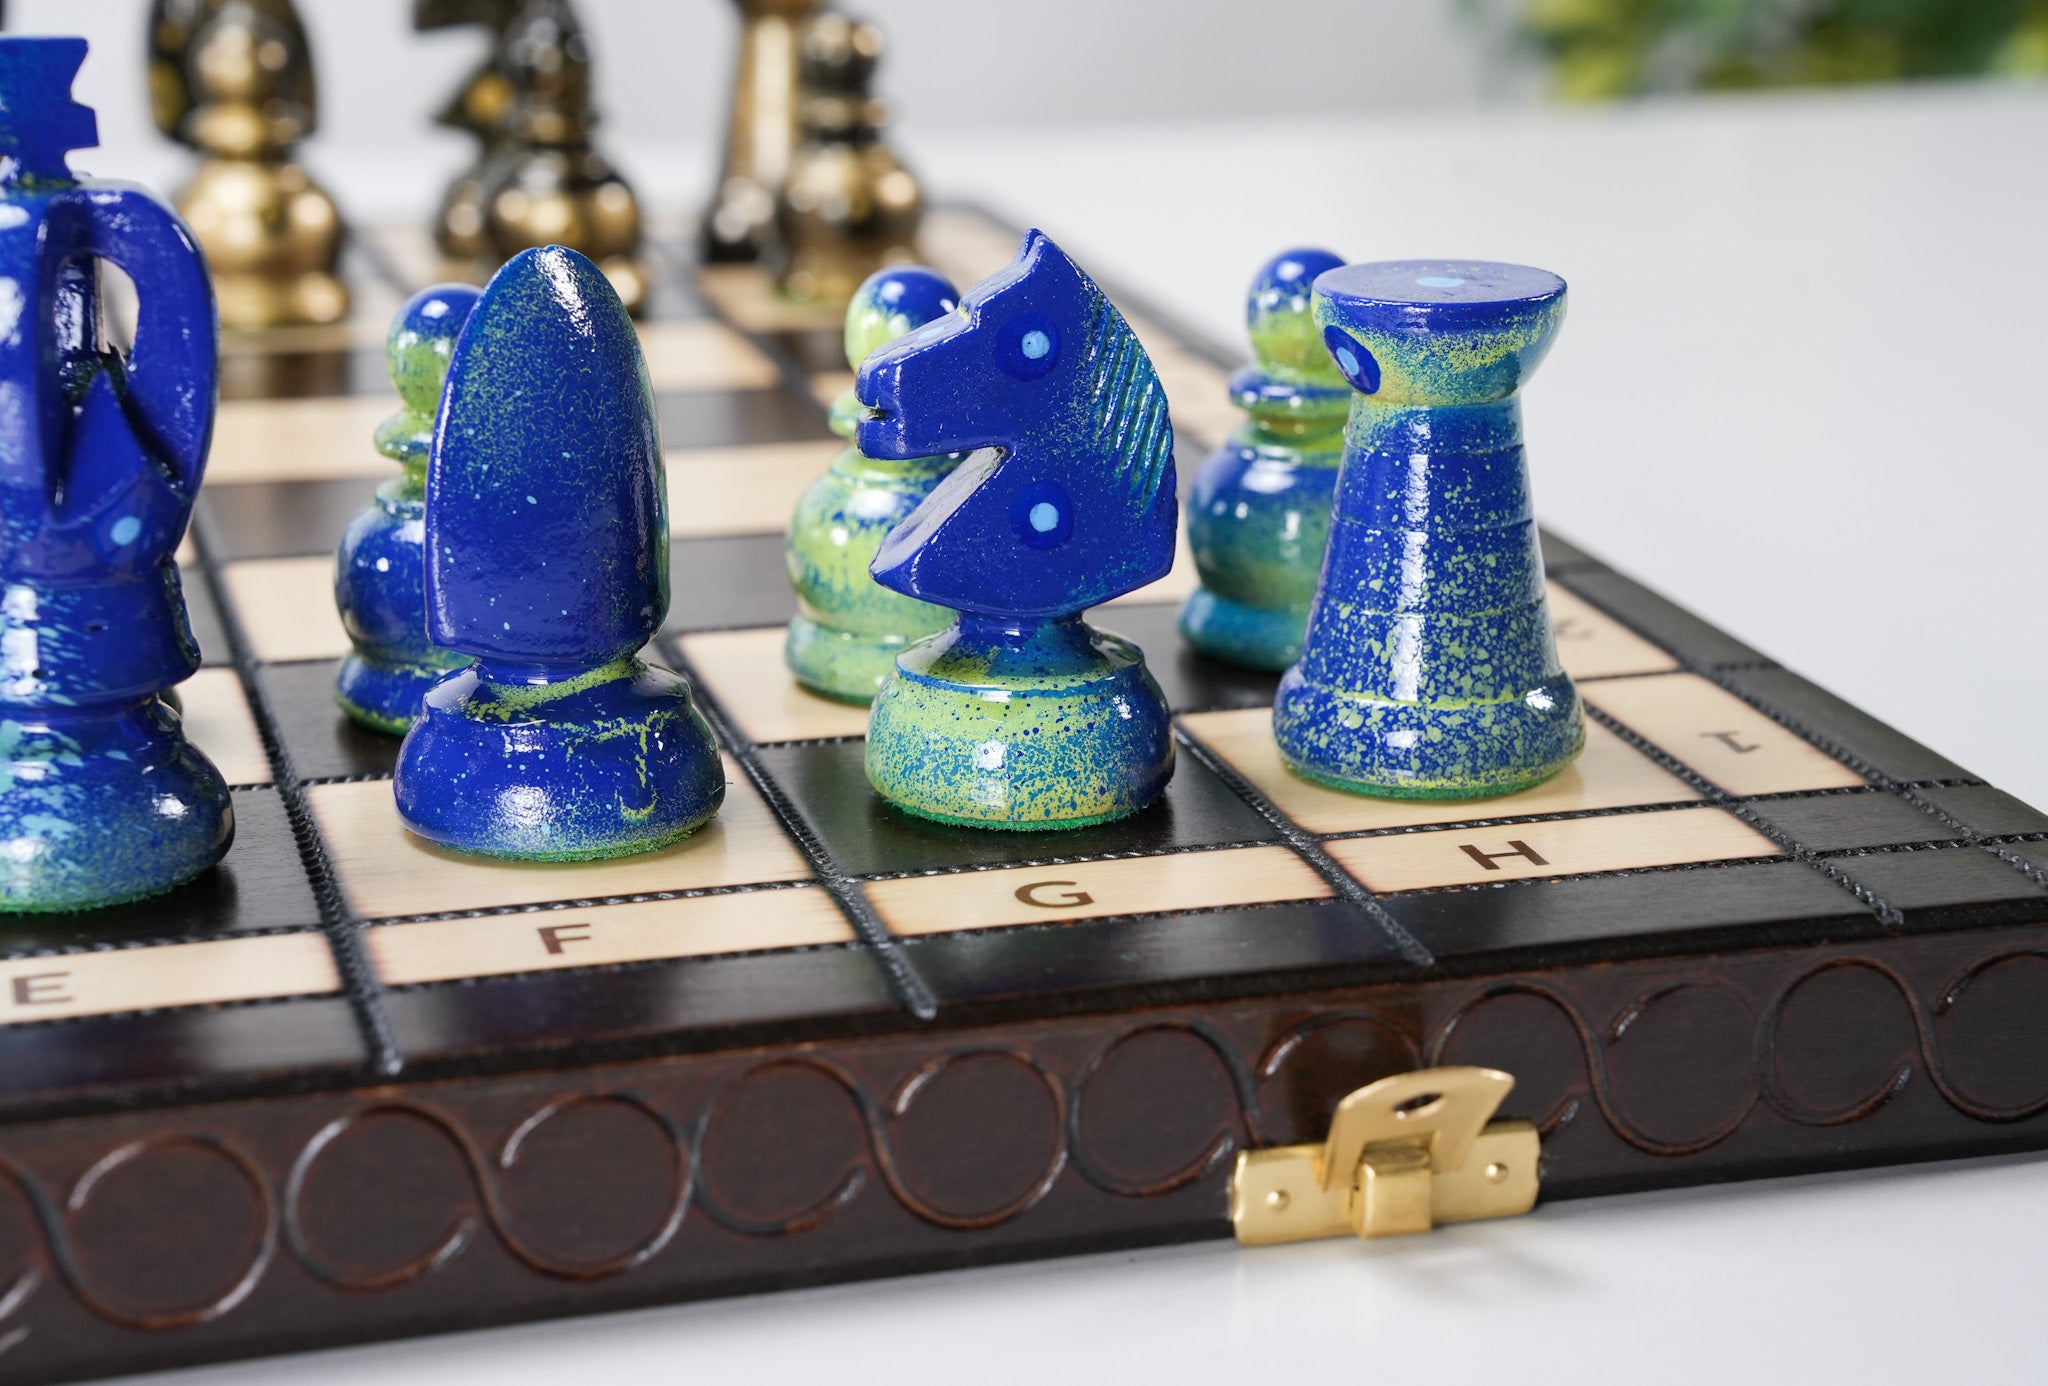 The Smooth Operator - Sydney Gruber Painted 17" Large Kings Chess Set #7 - Chess Set - Chess-House